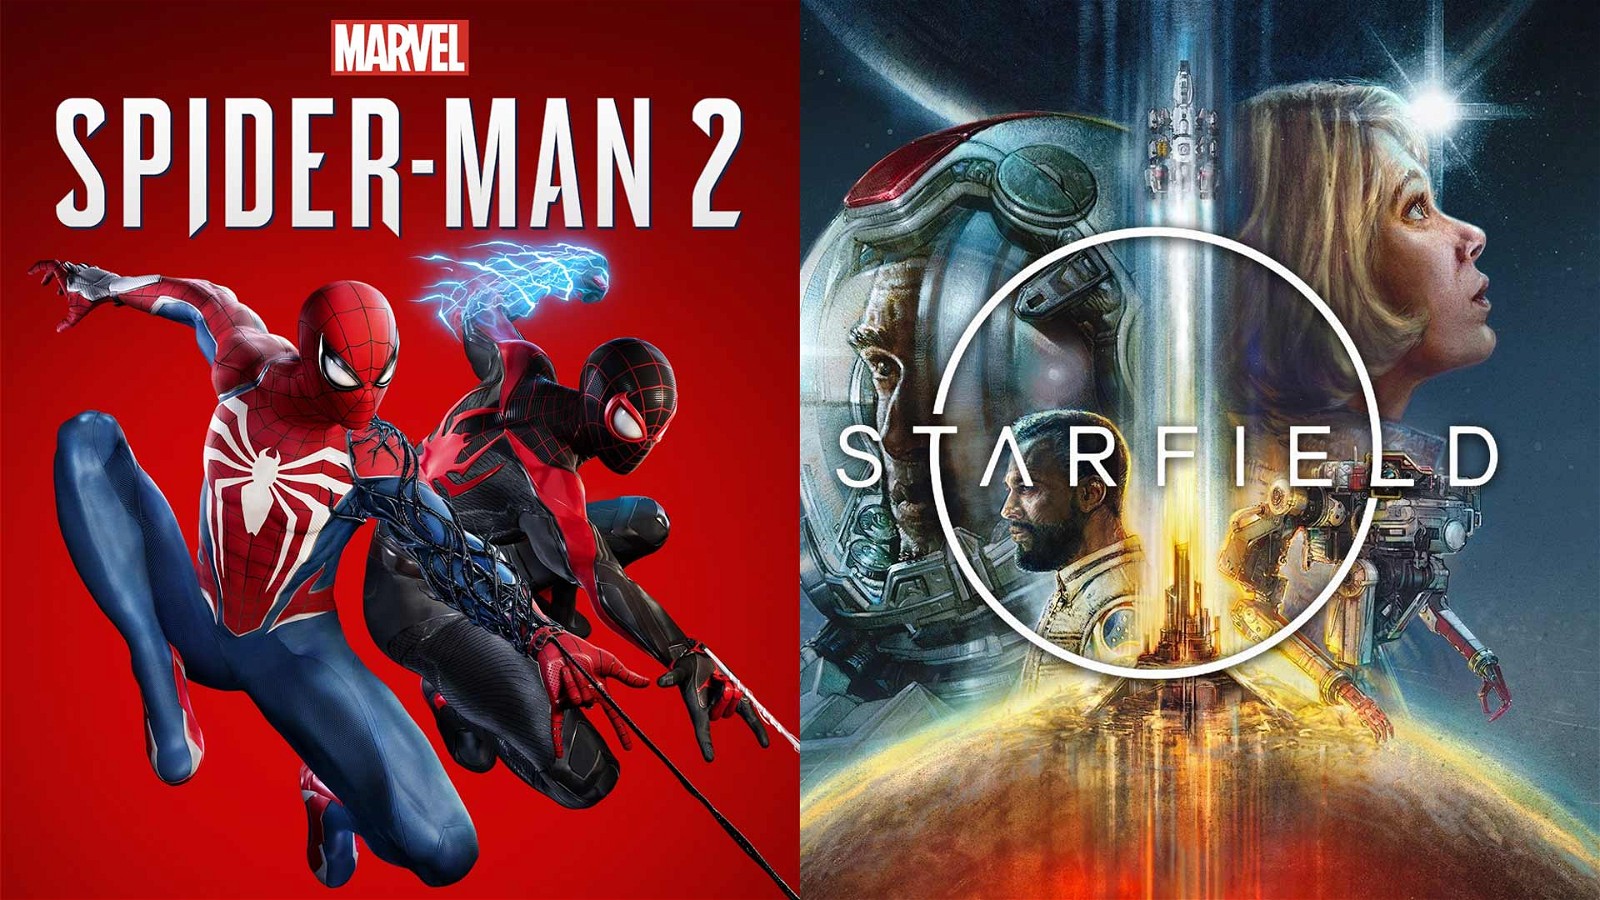 Spider-Man 2 and Starfield, Upcoming Exclusives For Both PlayStation and Xbox